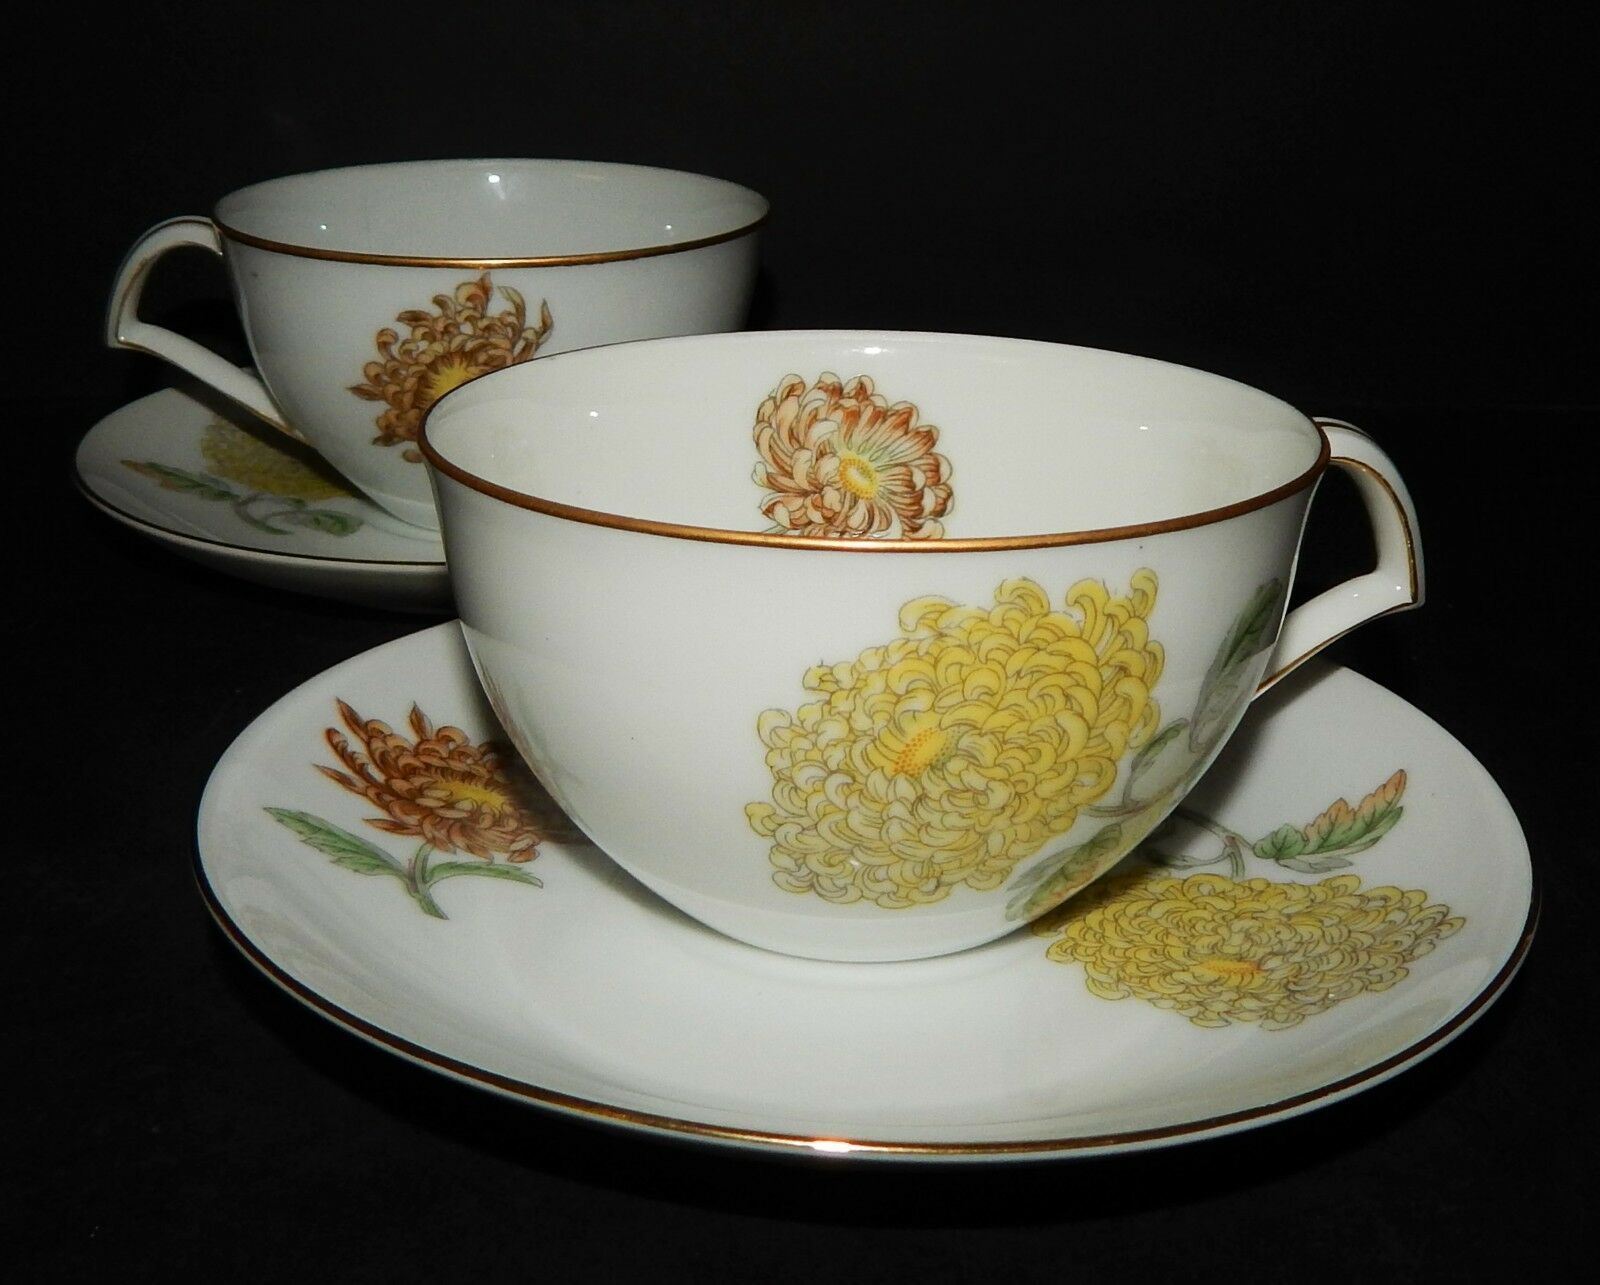 Primary image for 2 Kent Verona China Cup & Saucers Occupied Japan Chrysanthemums Gold Rim Vintage